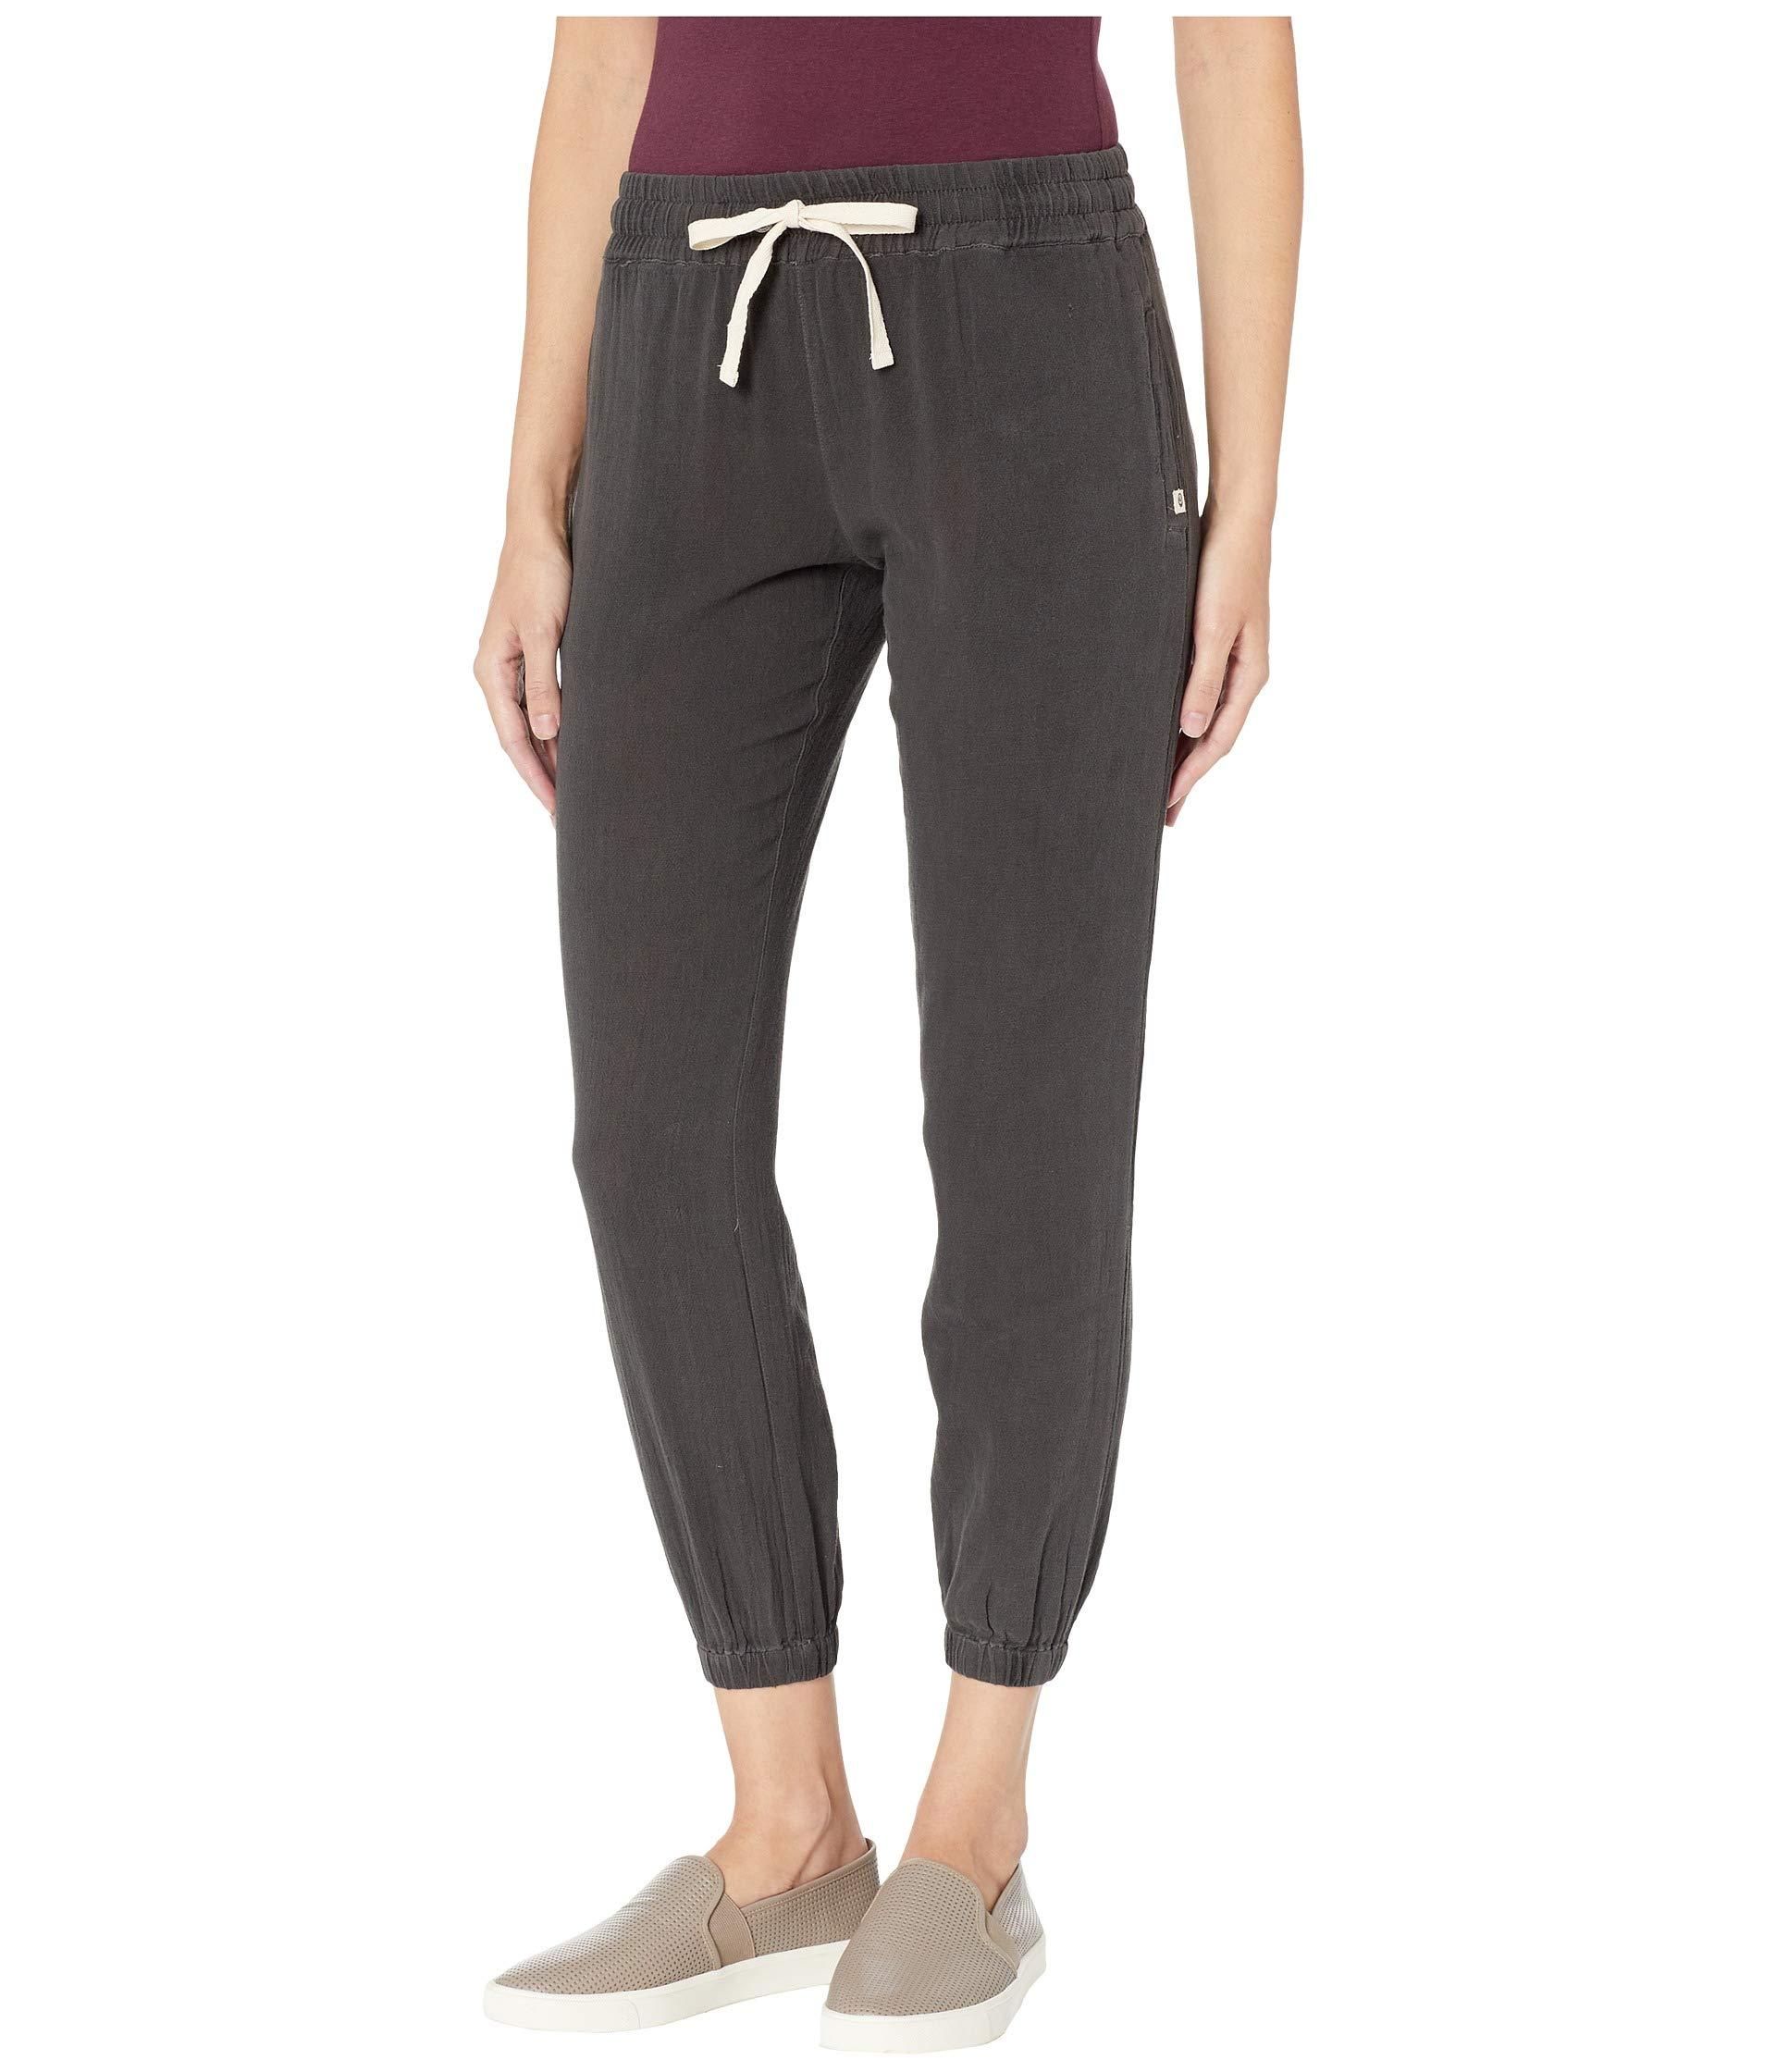 Rip Curl Cotton Classic Surf Pants in Black - Lyst